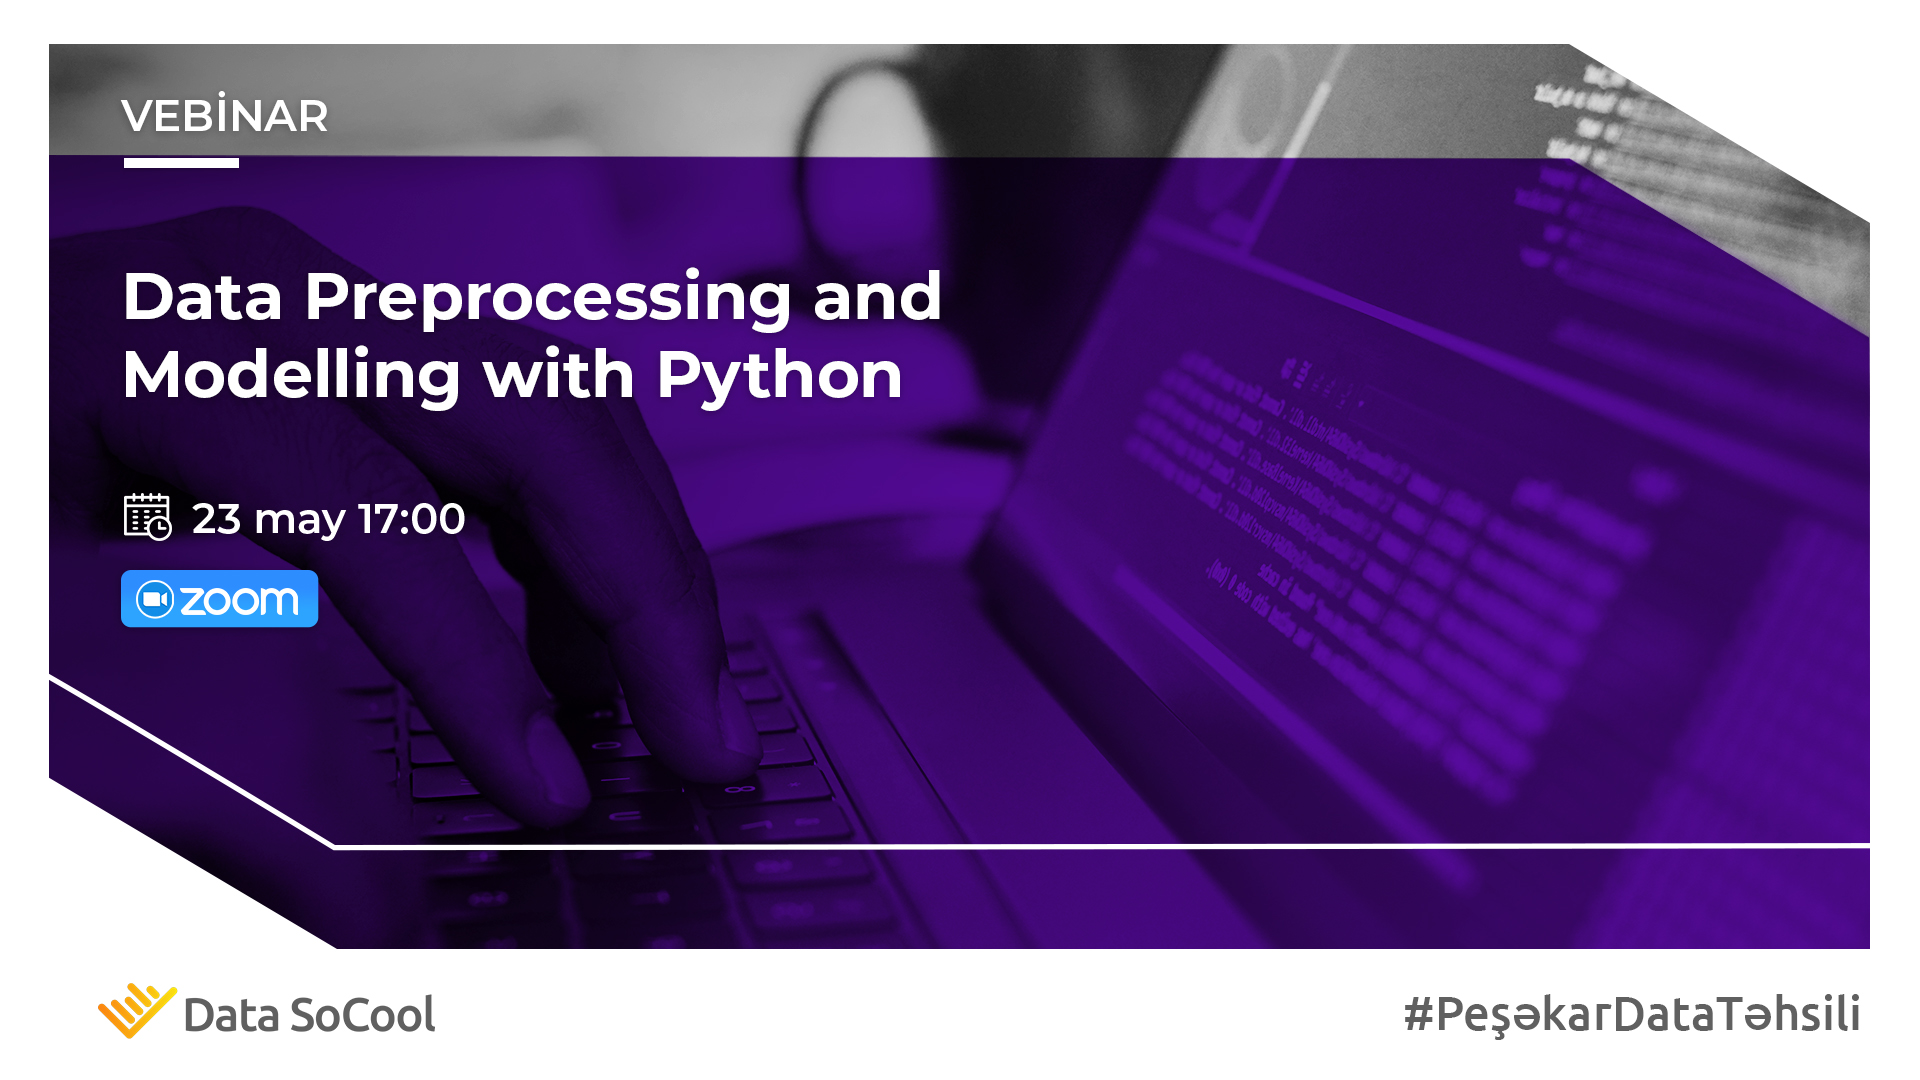 Webinar: Data Preprocessing and Modelling with Python